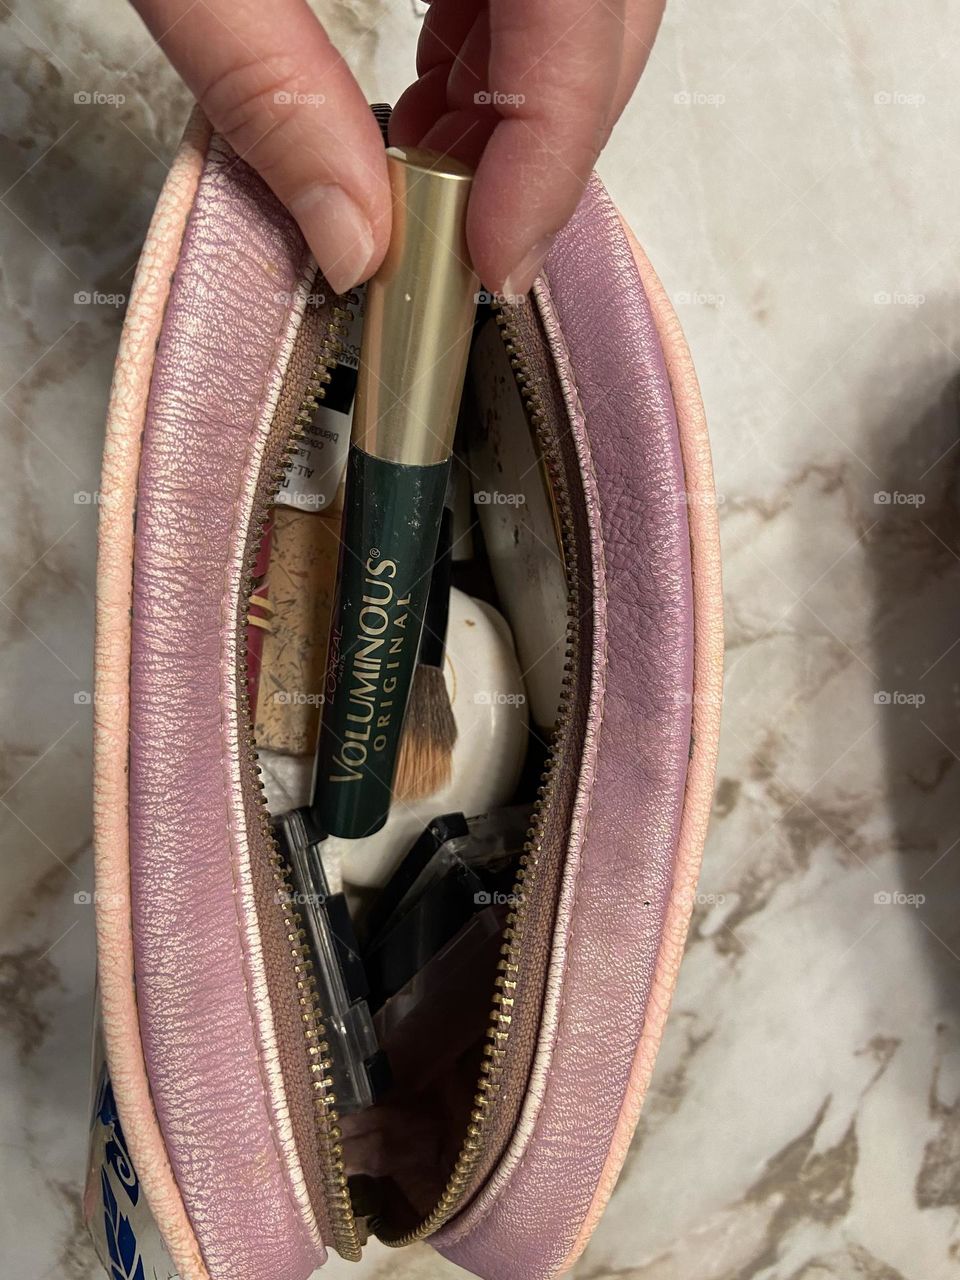 Putting my favorite L’Oréal Voluminous Mascara in Deep Green in my makeup bag, which also contains foundation, makeup brushes, a compact and eye shadows. The bag is from Box Lunch, which partners with Feeding America to get food to people in need. 